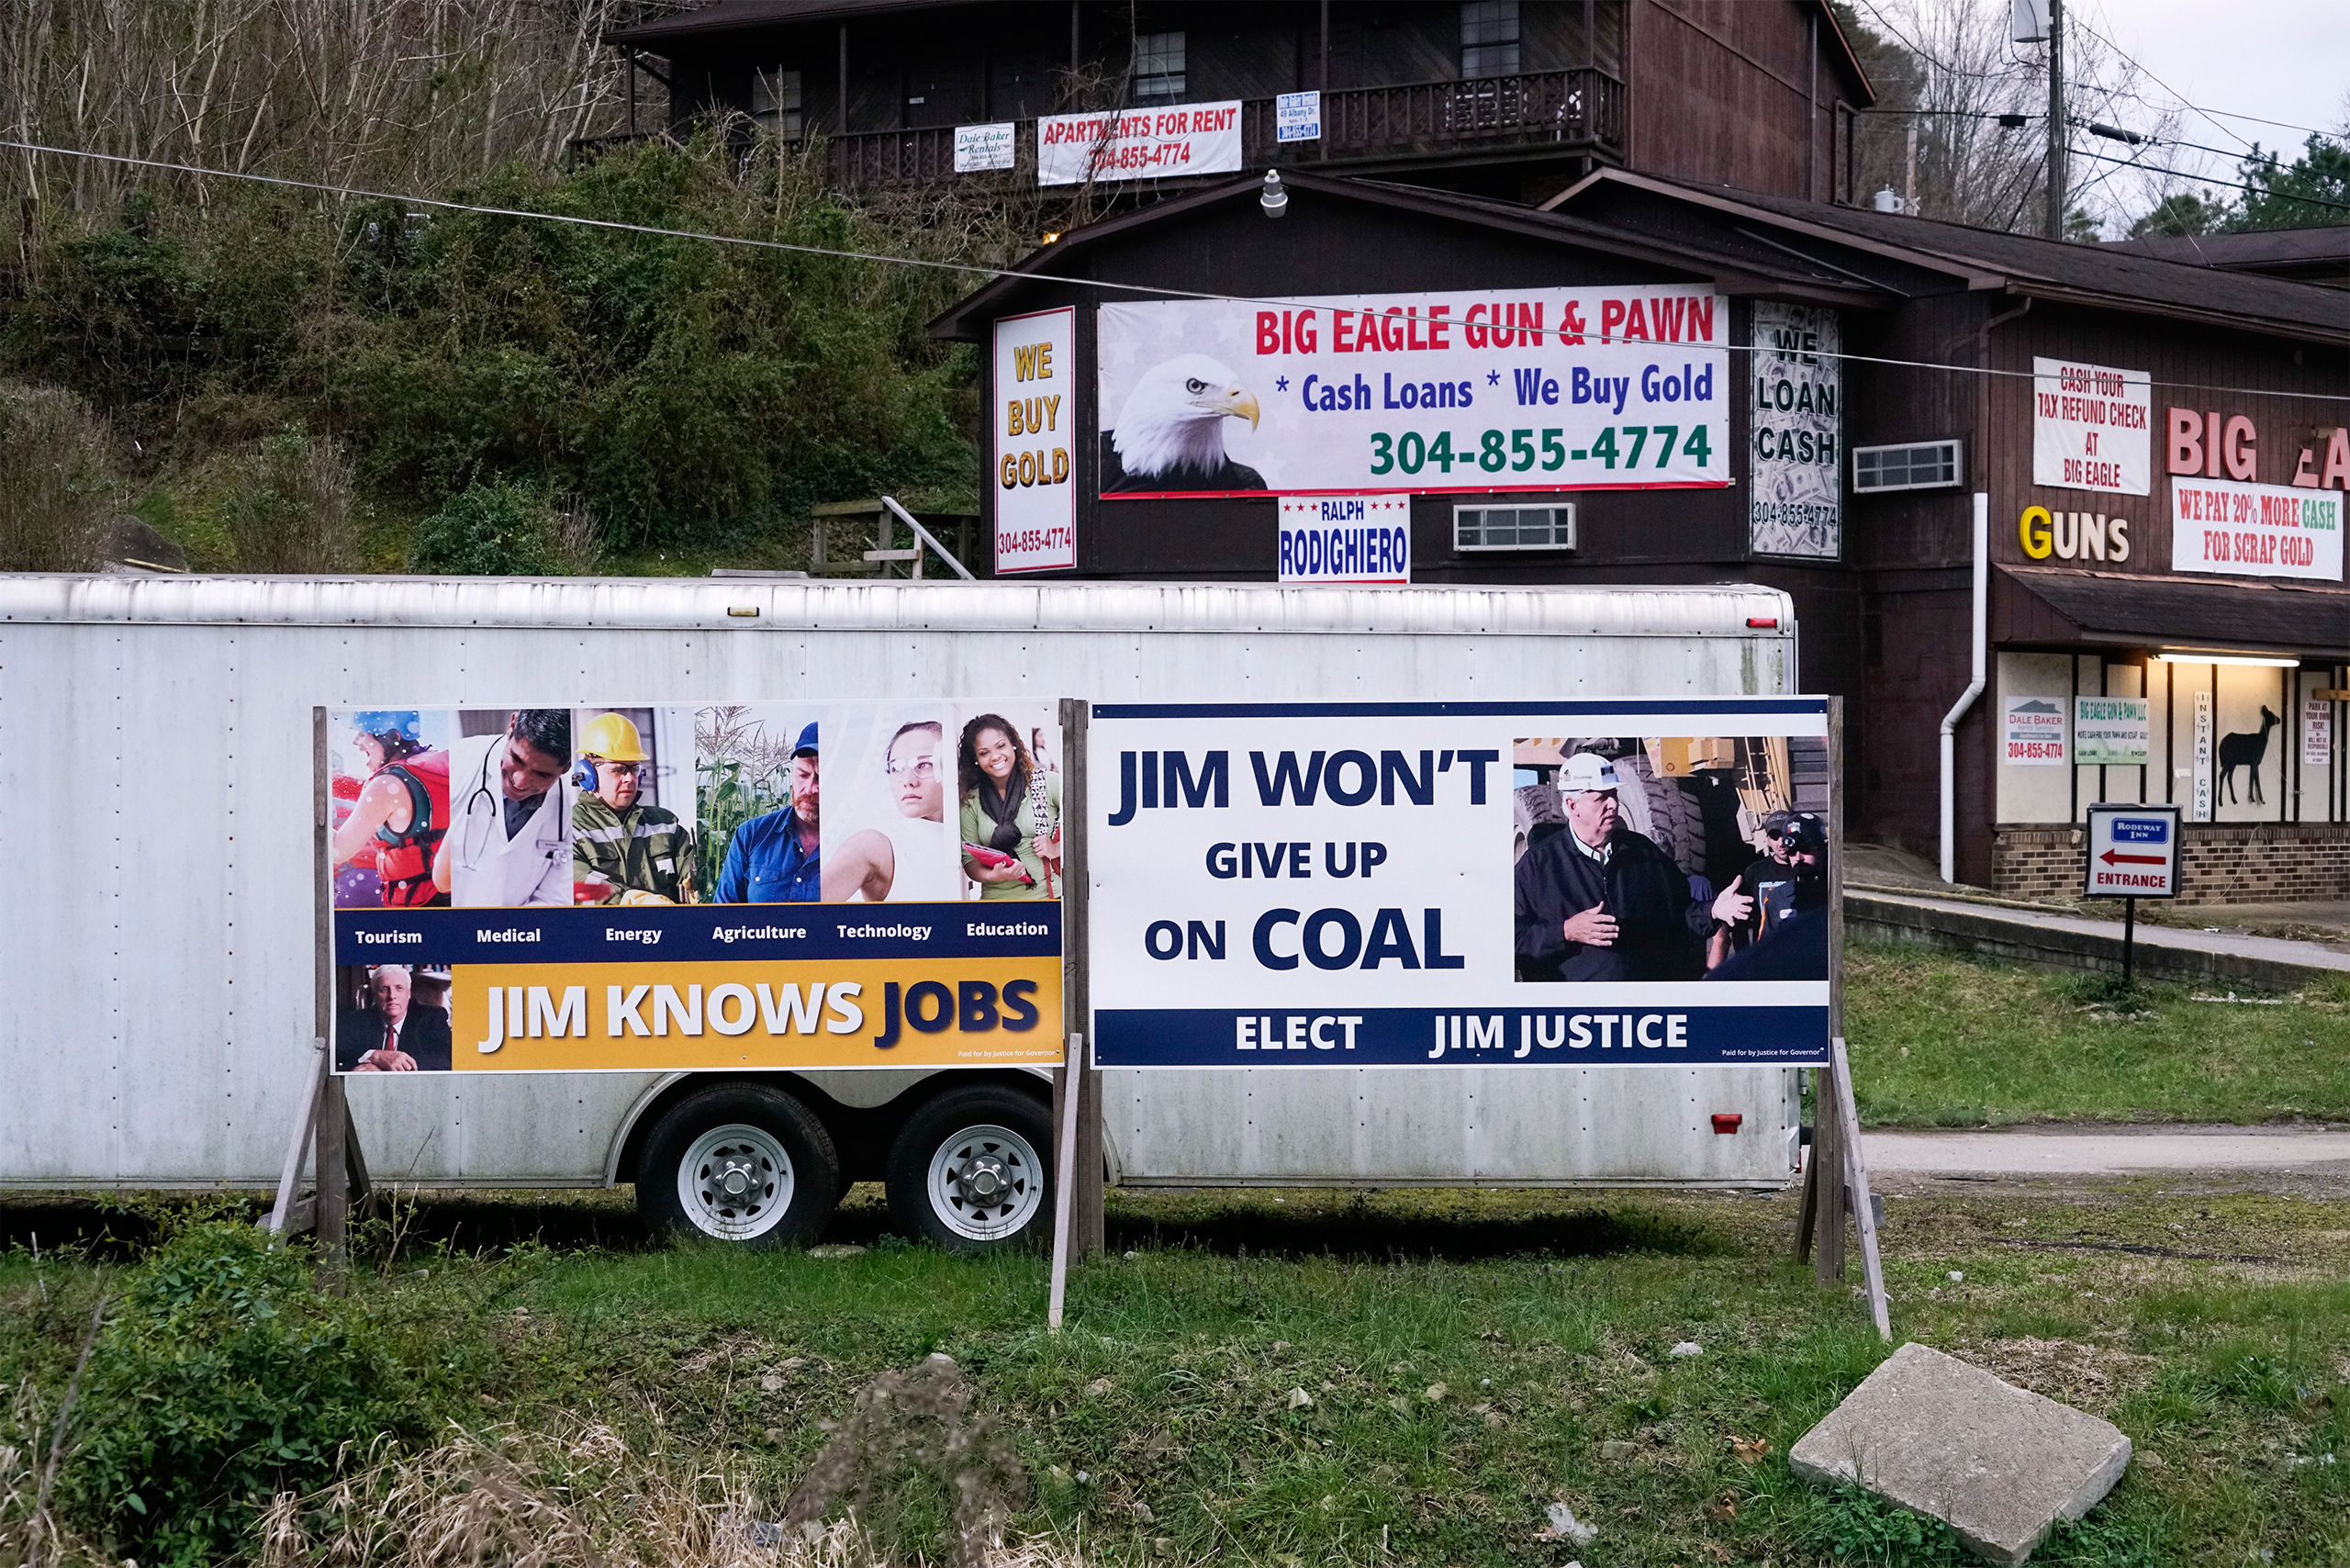 Election posters for Jim Justice (now Governor of West Virginia) appear in Chapmanville, W.Va., on Mar. 18, 2017. (Peter van Agtmael—Magnum Photos for TIME)